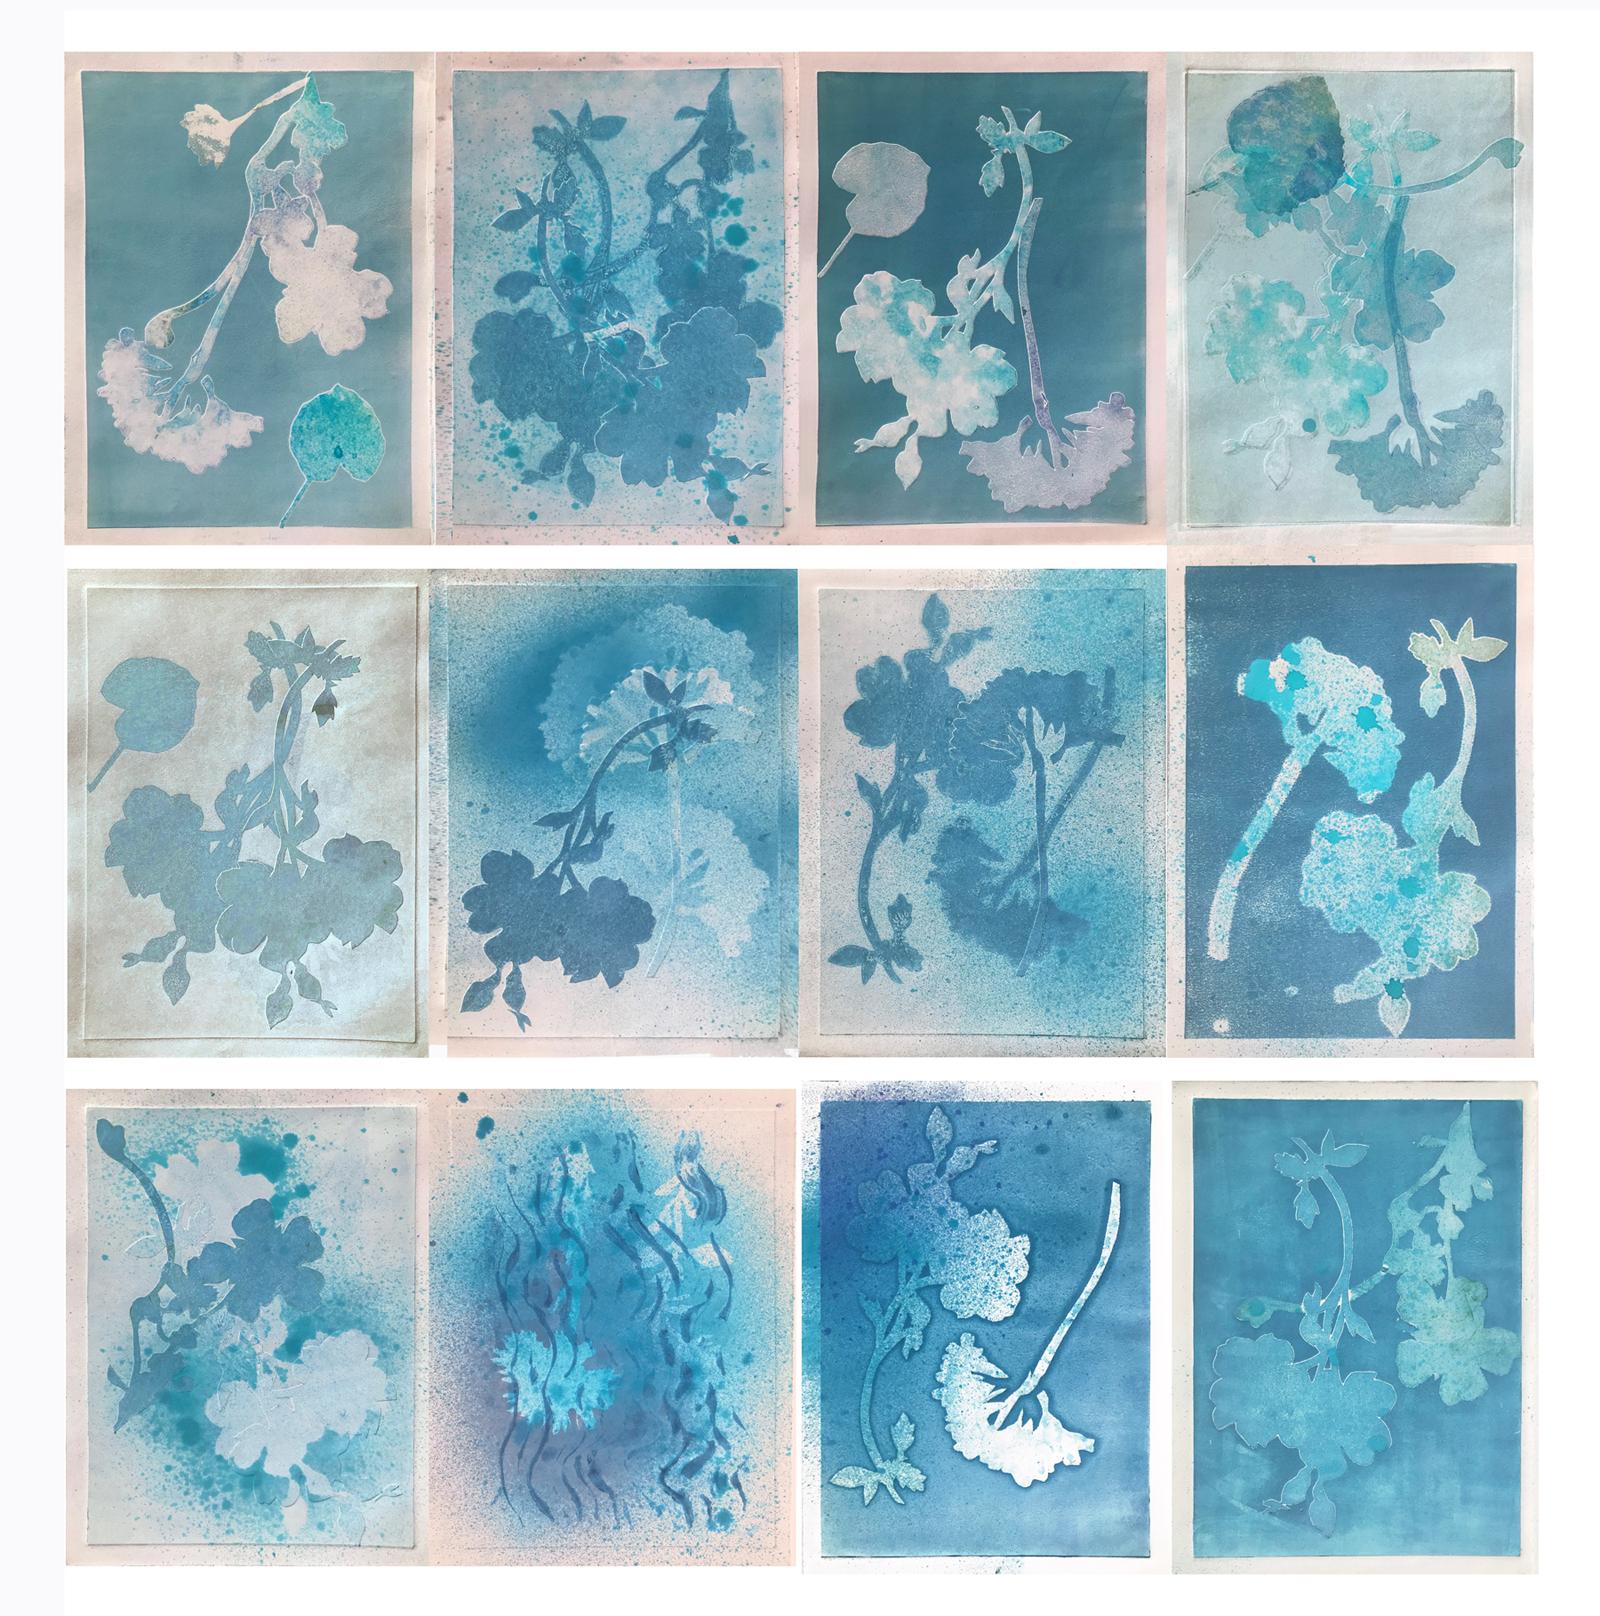 Lois Bender Still-Life Print - Flower Shadows I, 12 individual floral monotypes together in a grid